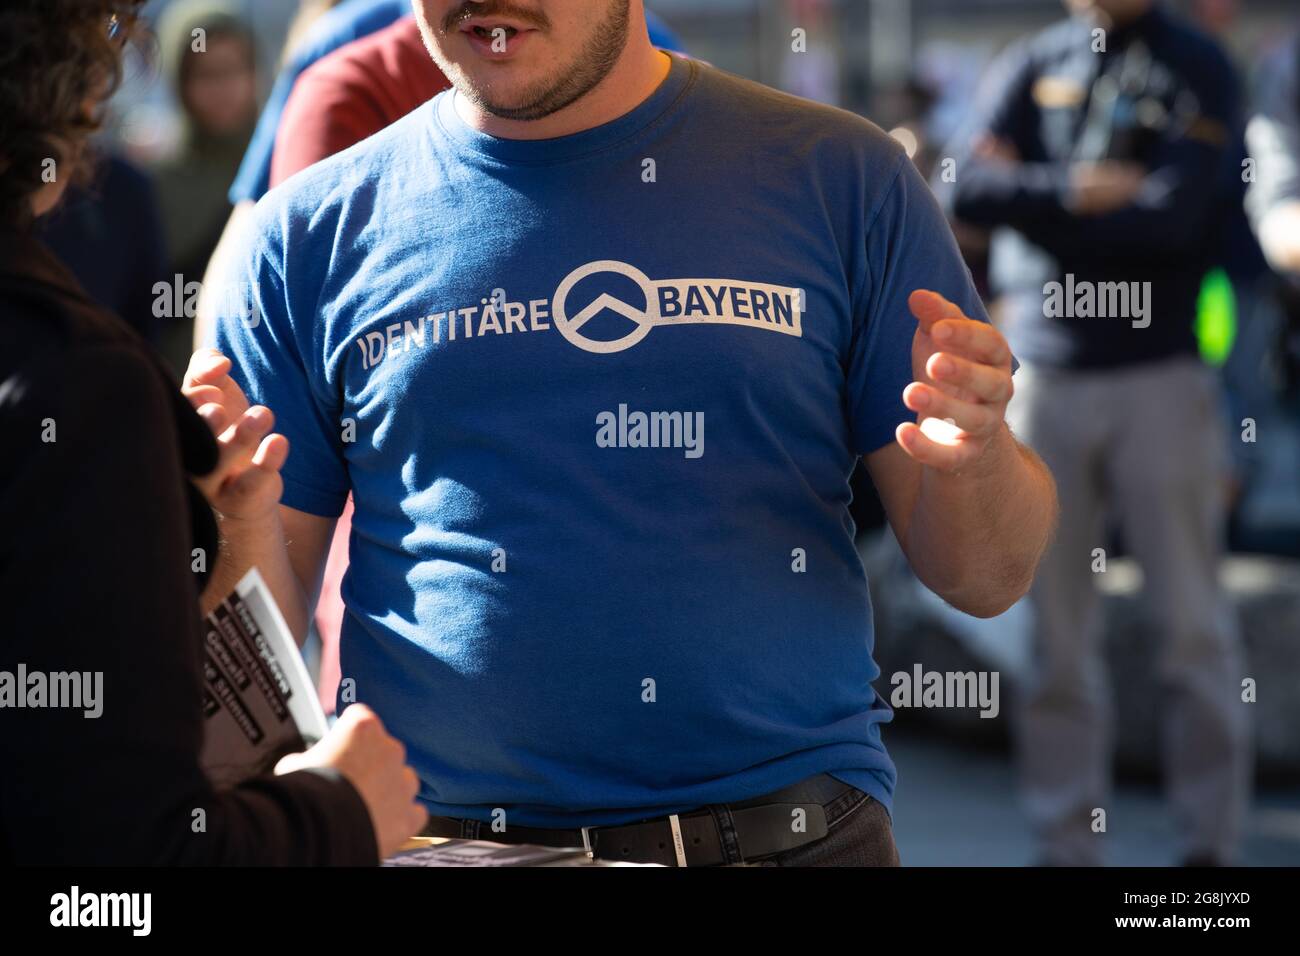 Munich, Germany. 26th Oct, 2019. T-Shirt of the IB Bayern. The extreme right Verfassungsschutz surveilled Identitaere Bewegung held a rally on 26. October 2016 in Munich. (Photo by Alexander Pohl/Sipa USA) Credit: Sipa USA/Alamy Live News Stock Photo